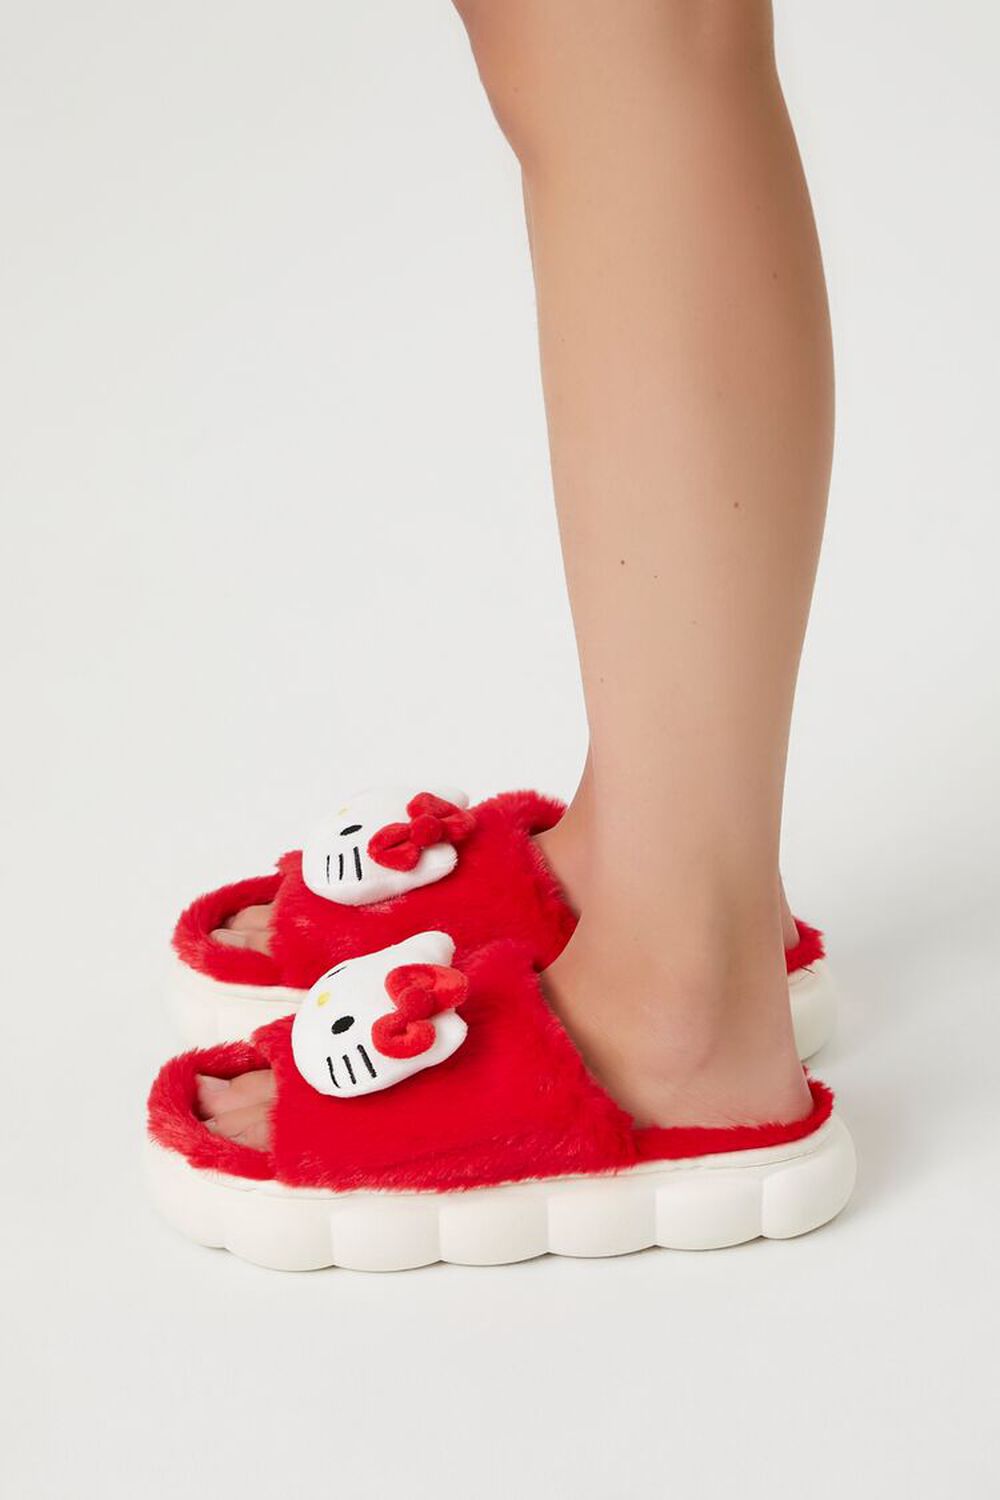 RED/WHITE Hello Kitty Plush House Slippers, image 2